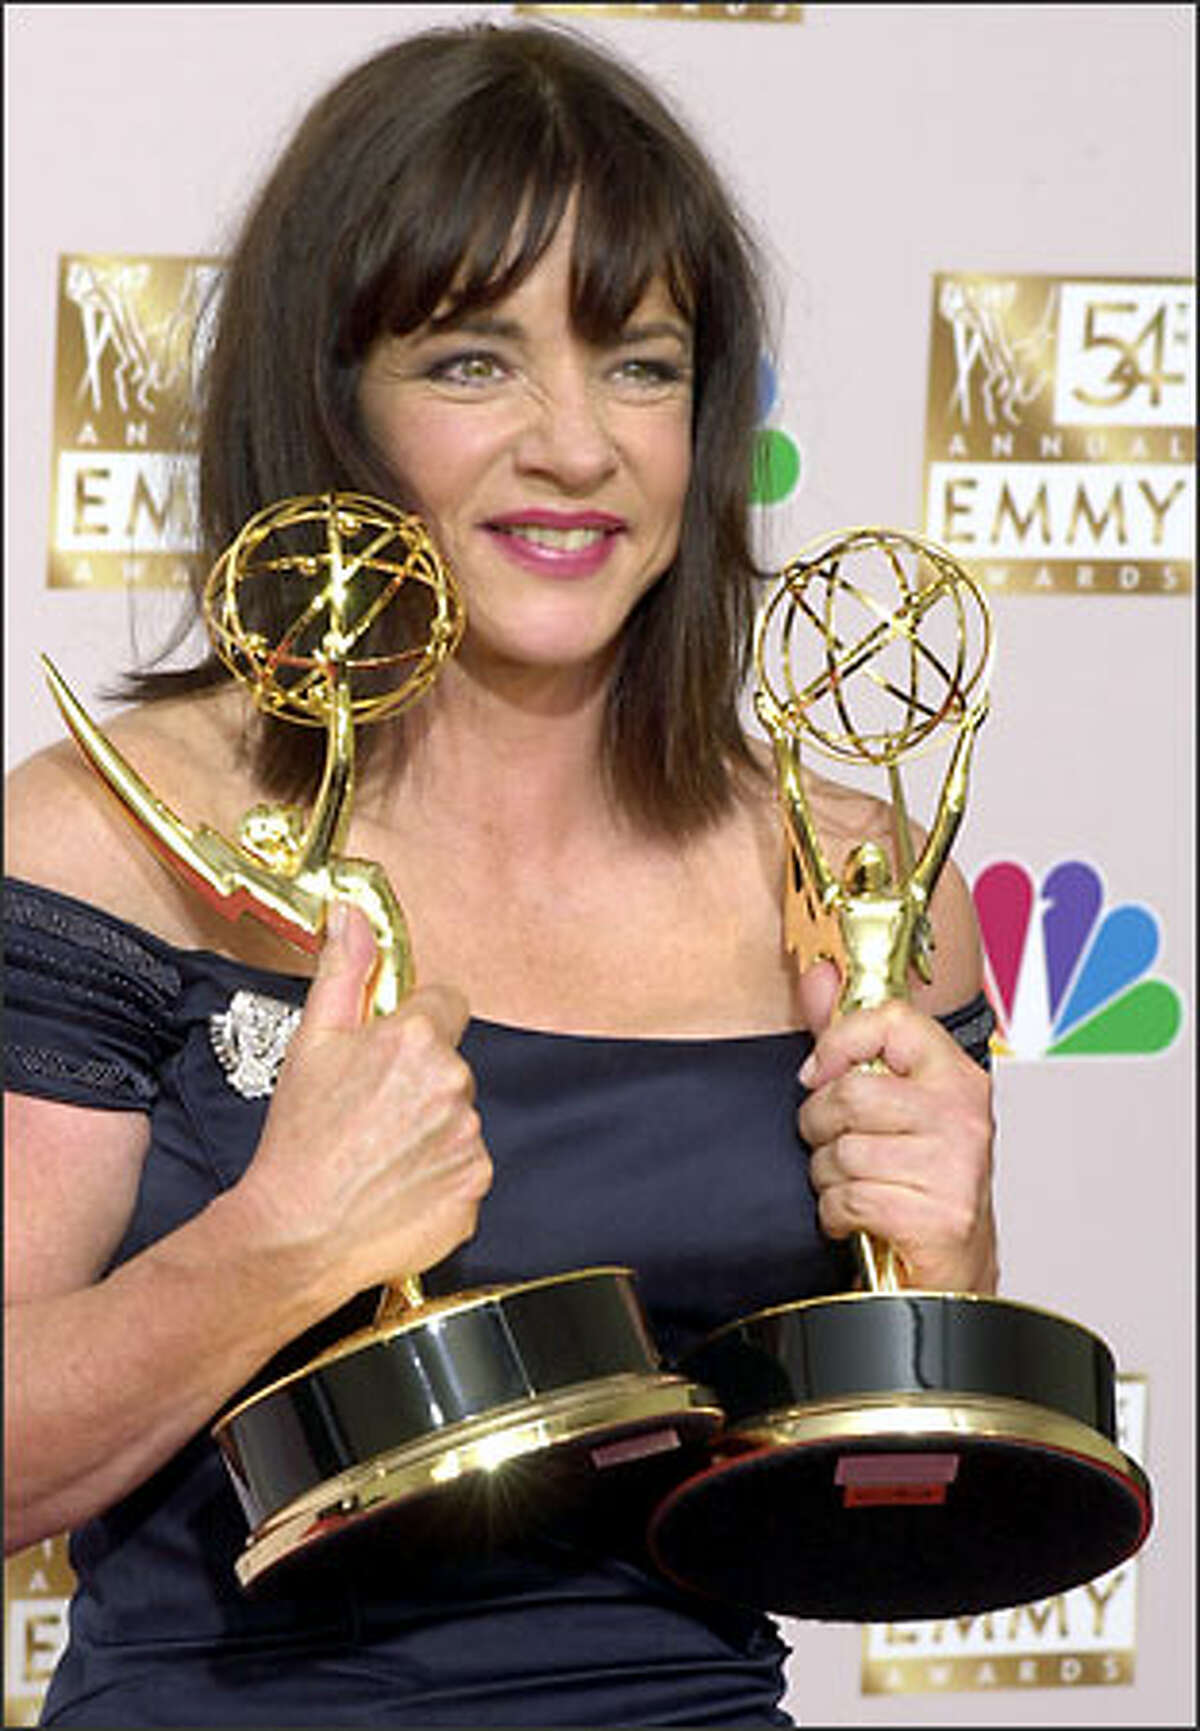 Stockard Channing displays the two Emmys she won last night. Channing won for roles in "The West Wing" and "The Matthew Shepard Story."